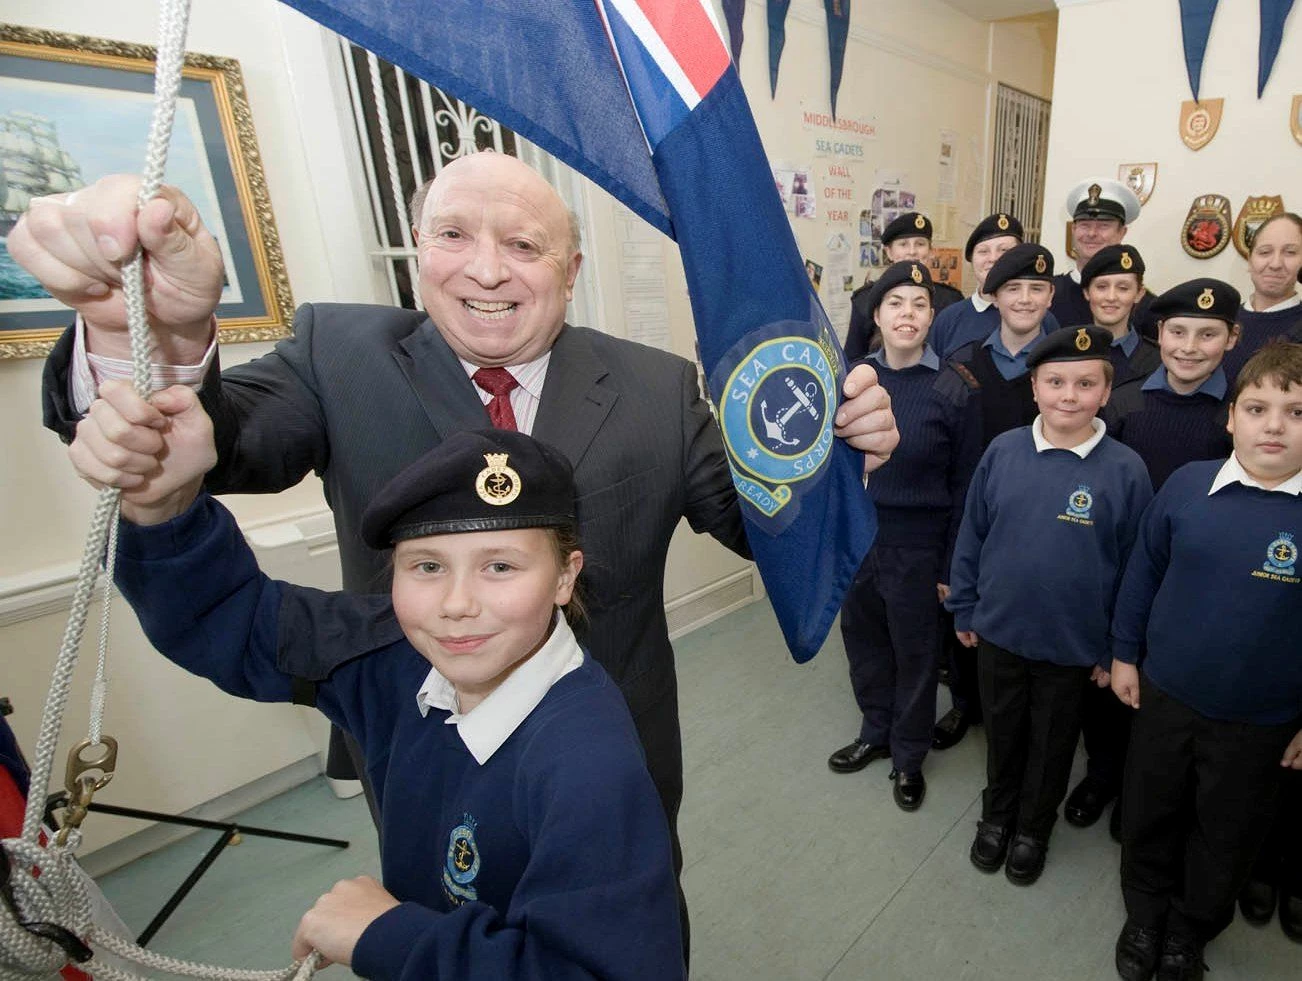 Martin Levinson and Middlesbrough Sea Cadets